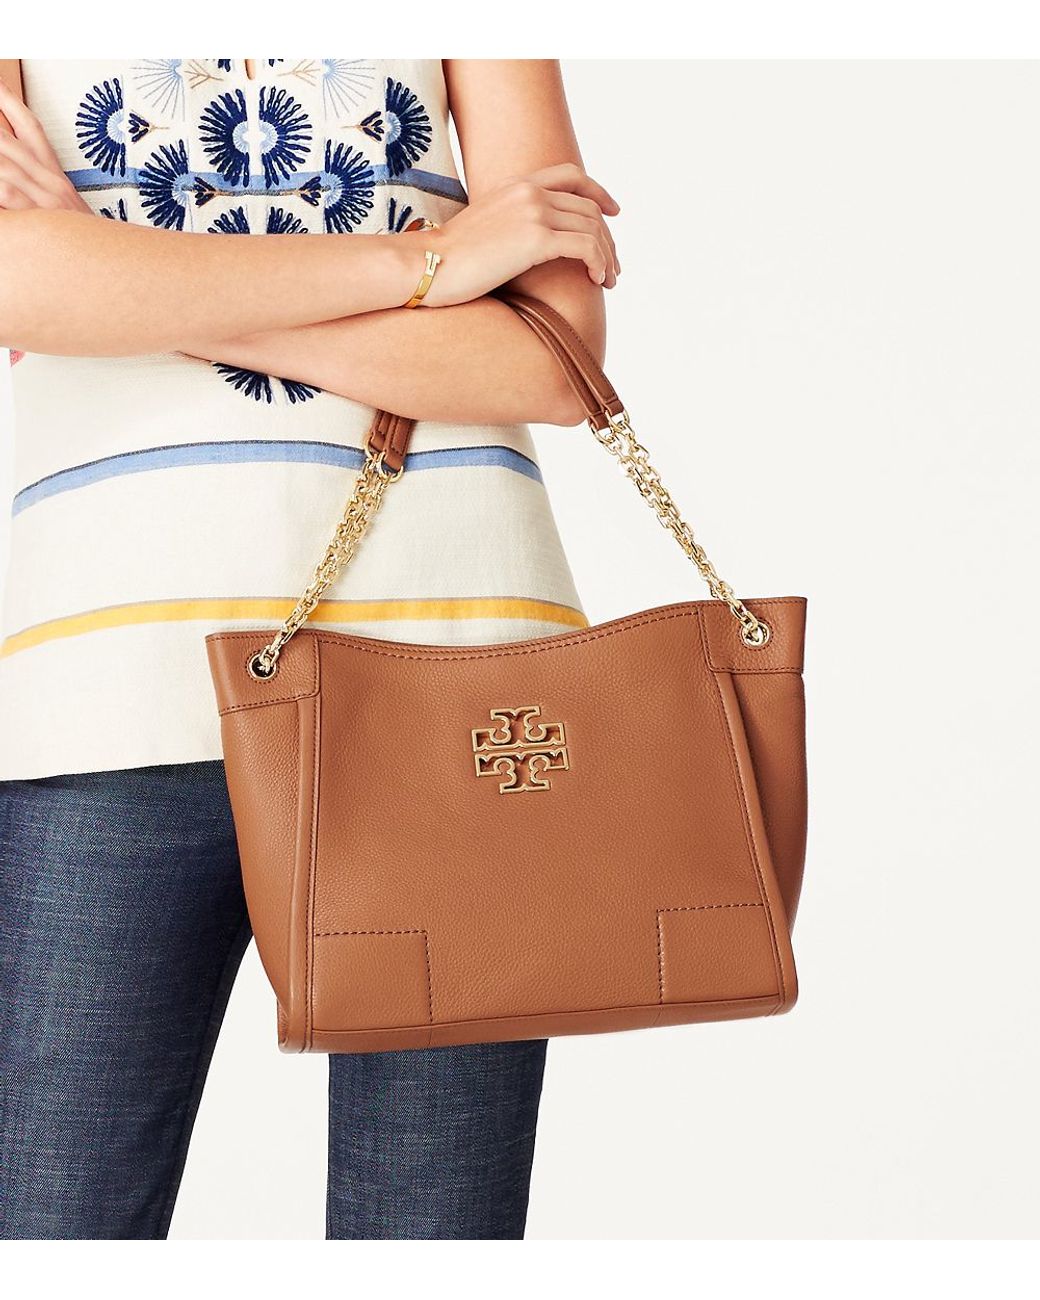 Tory Burch Britten Small Slouchy Tote in Blue | Lyst